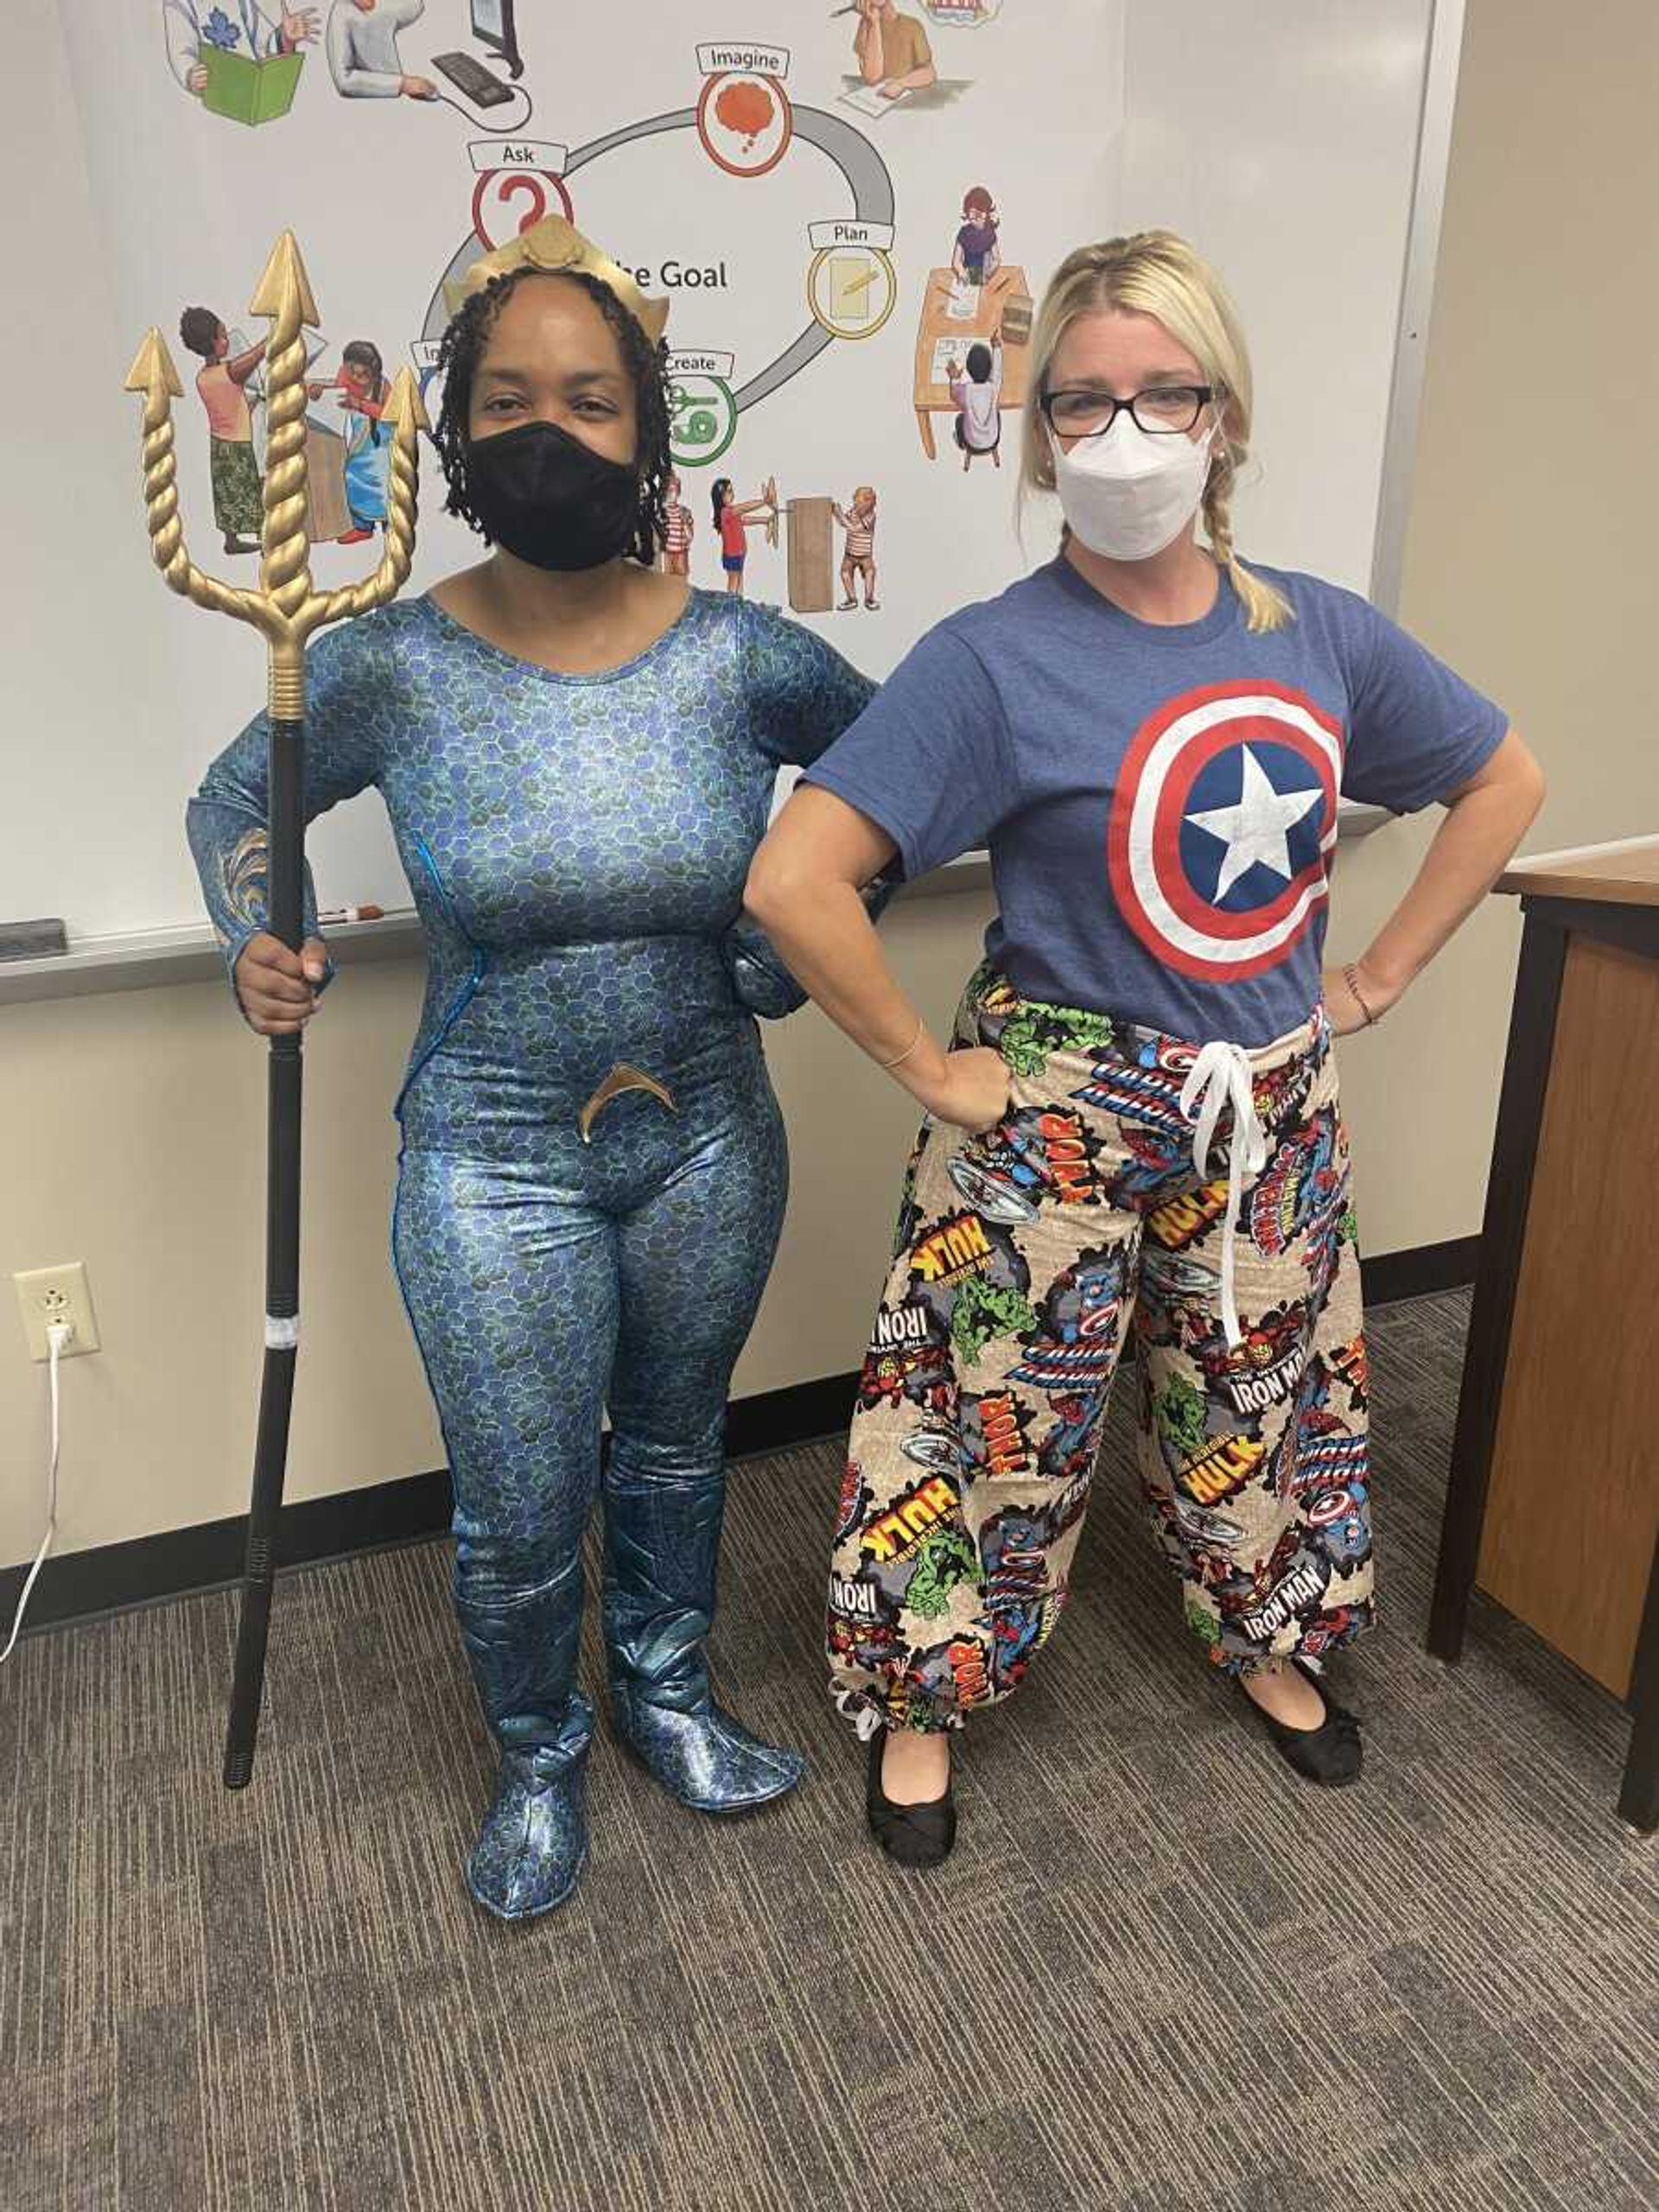 Dr. Shonta Smith (left) dressed up as Aqua-man and Dr. Brandy Hepler (right) dressed in the pants she created. 